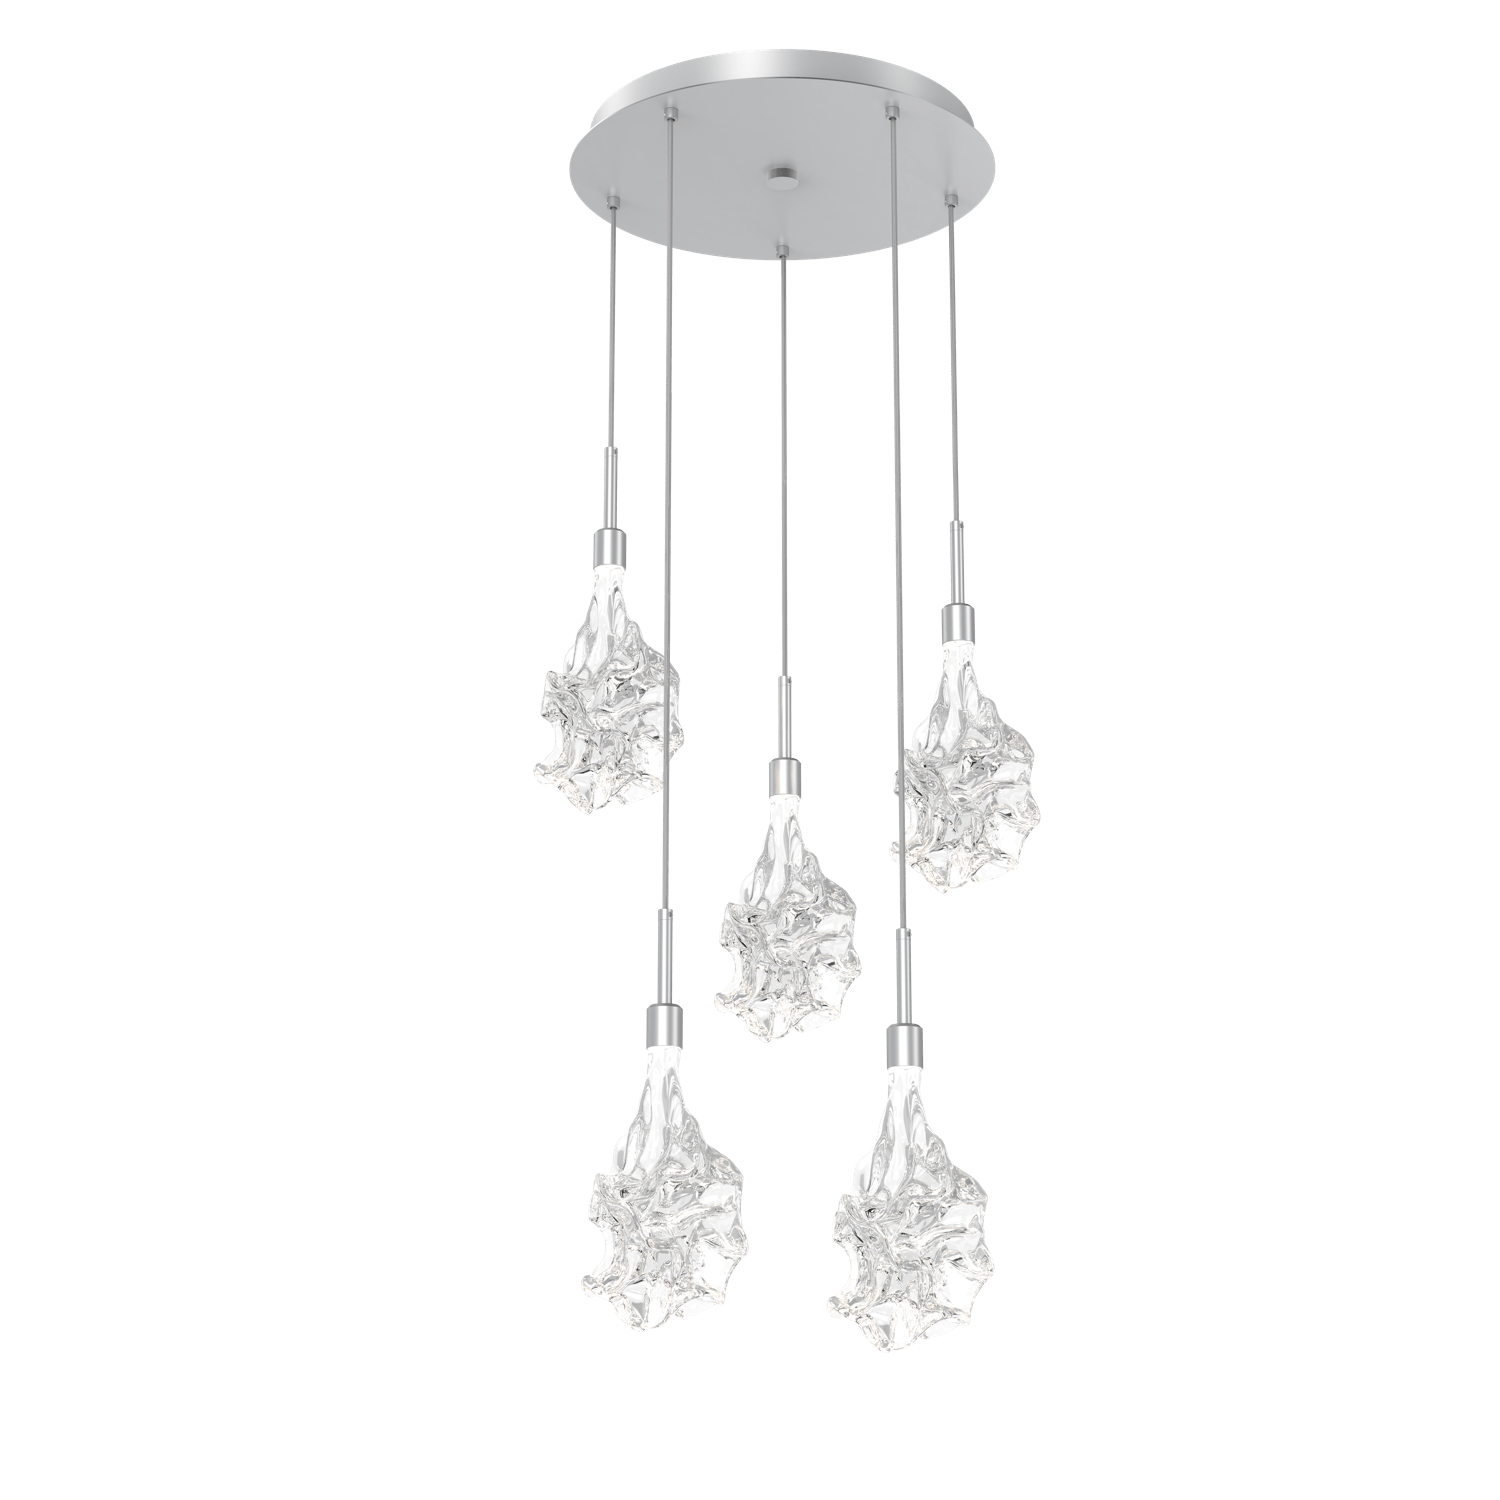 CHB0059-05-CS-Hammerton-Studio-Blossom-5-light-round-pendant-chandelier-with-classic-silver-finish-and-clear-handblown-crystal-glass-shades-and-LED-lamping